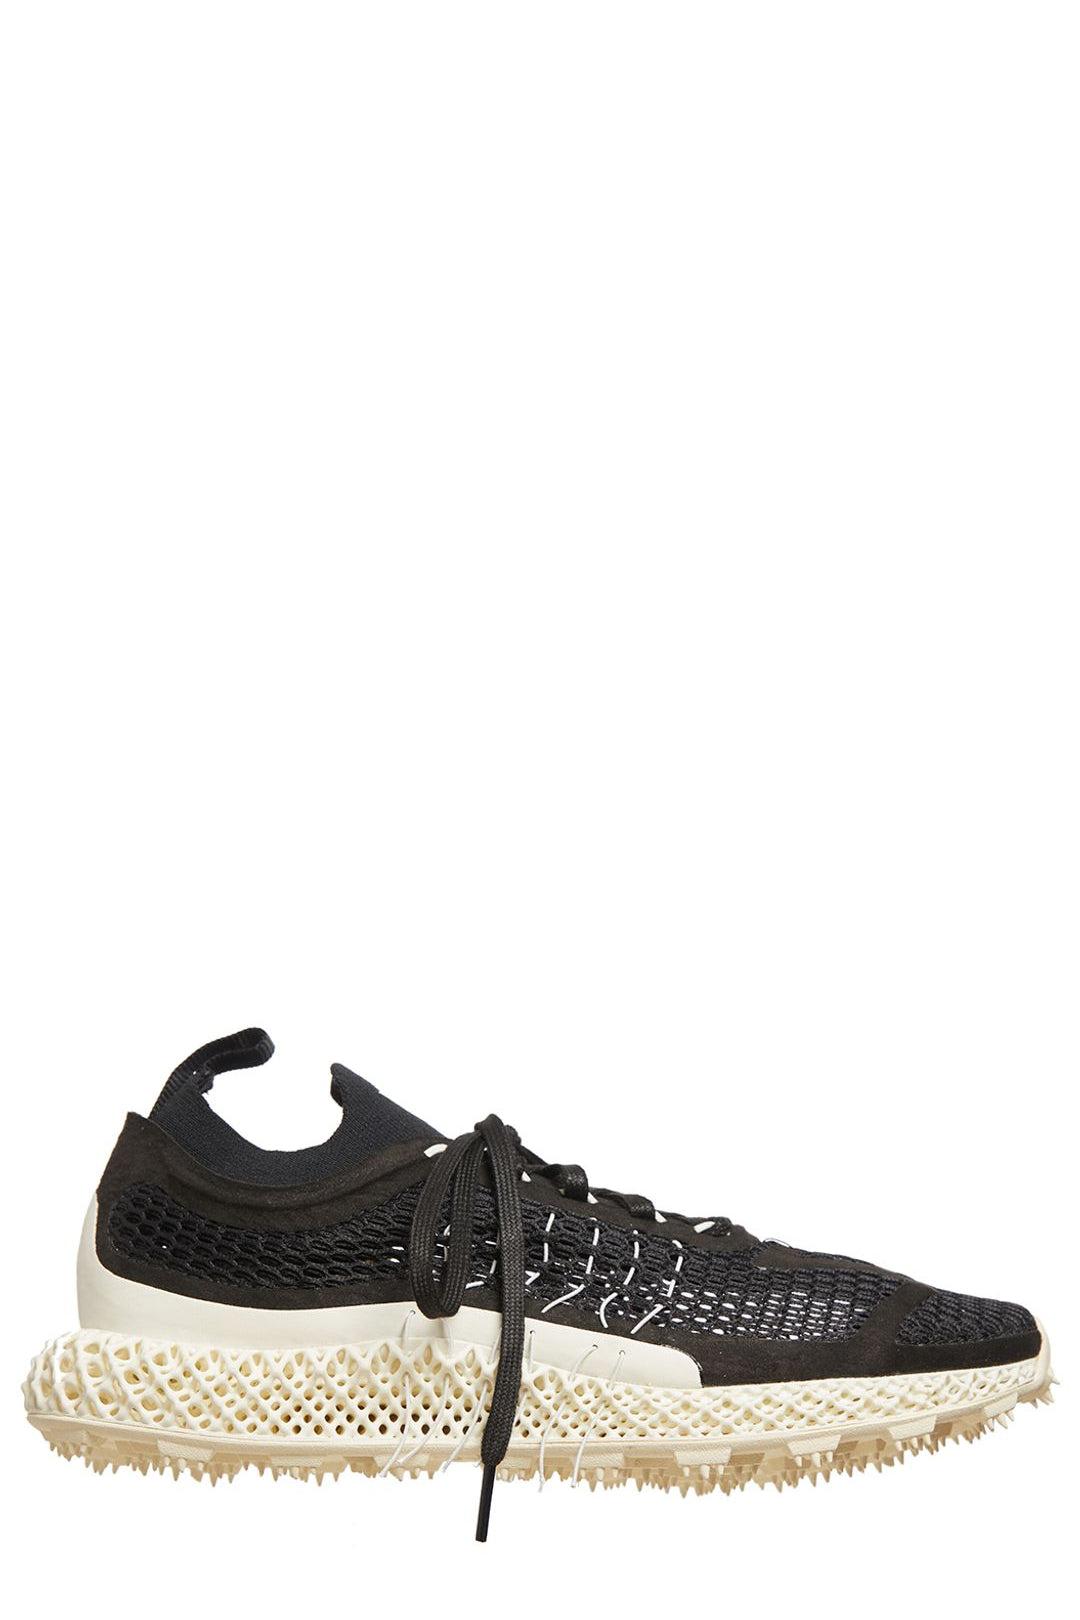 Y-3 SNEAKER 4D LACE-UP RUNNING SNEAKERS